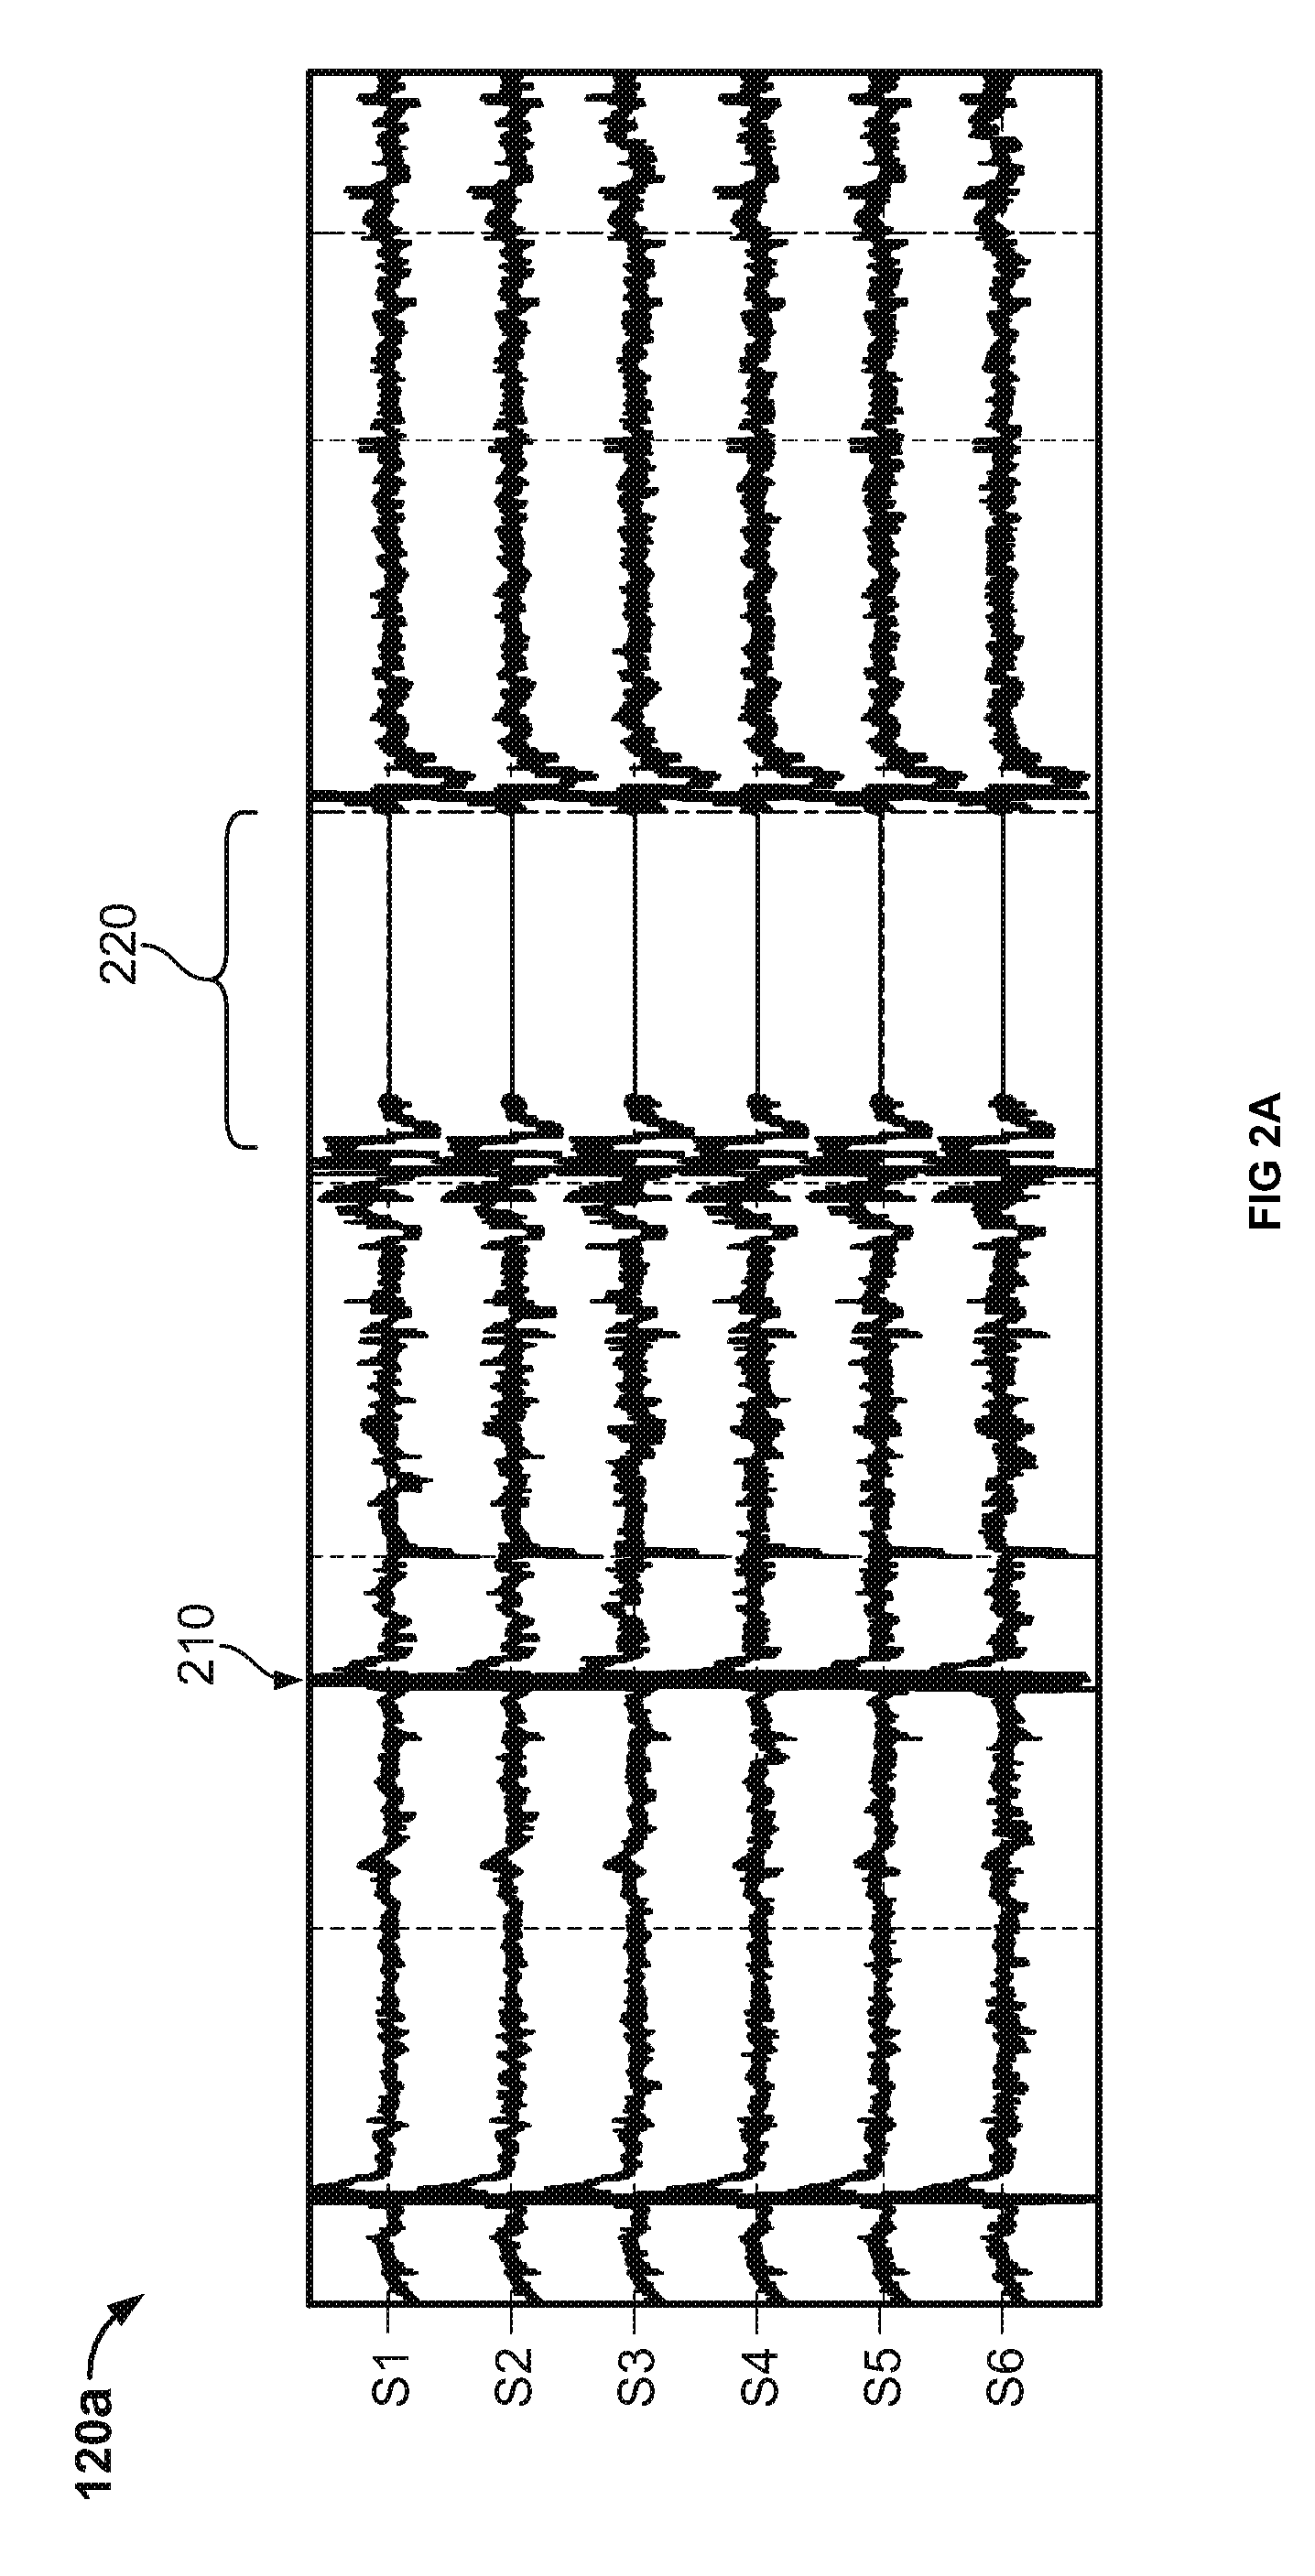 Processing for multi-channel signals